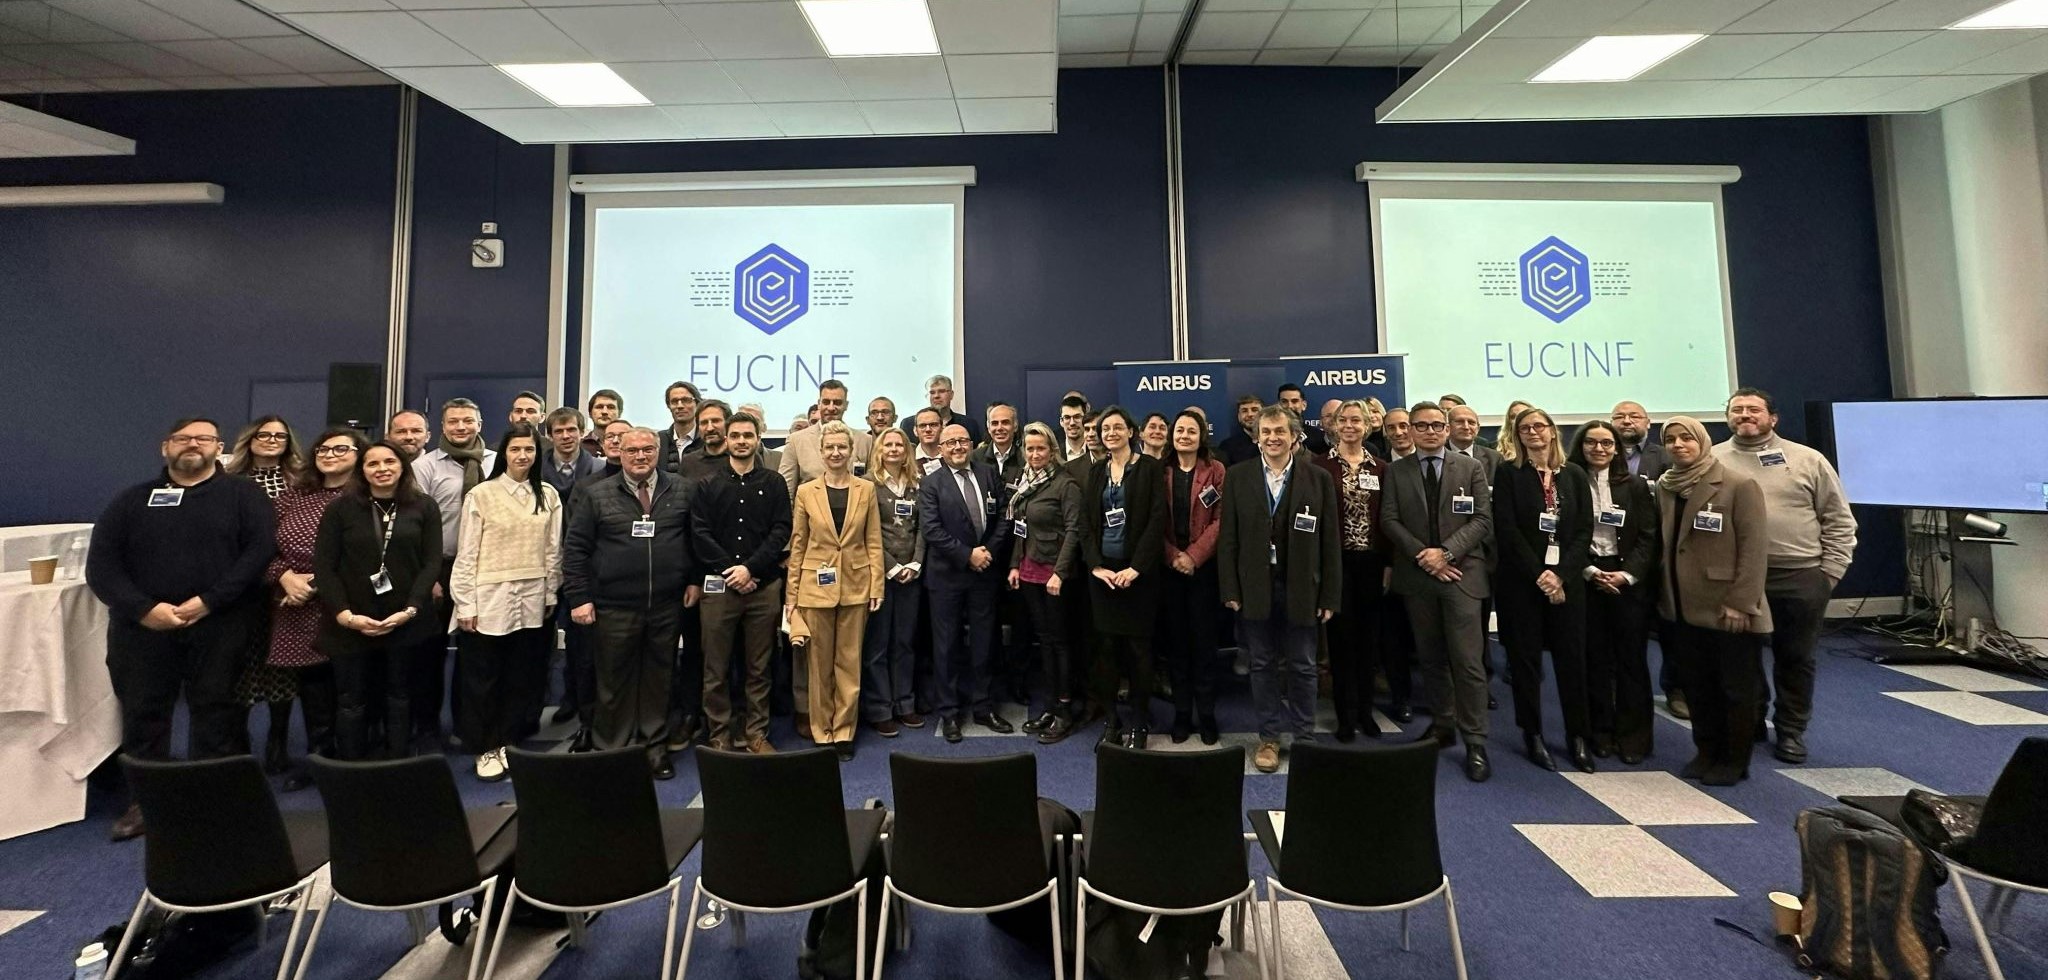 CDL is involved in EUCINF to develop a toolset for improving cyber and information warfare systems performance and cooperation between European cyber defence institutions